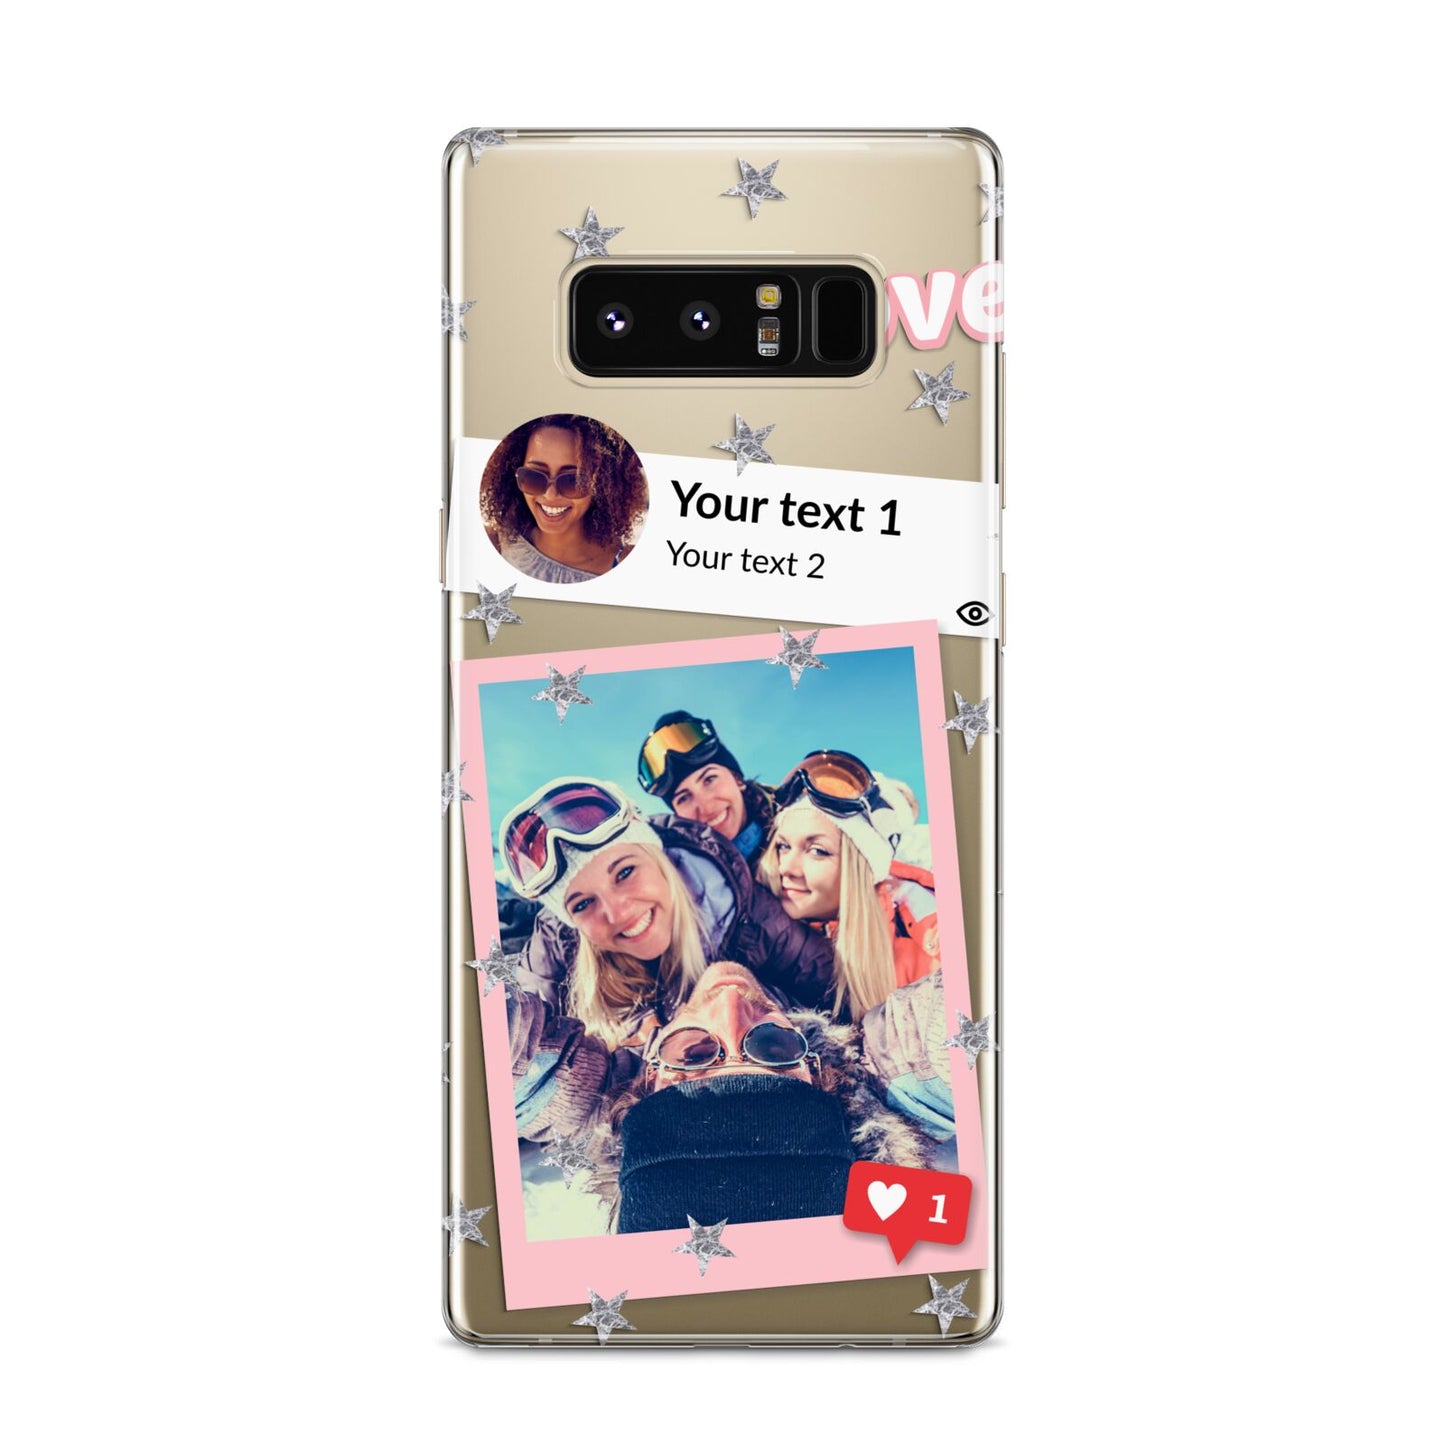 Starry Social Media Photo Montage Upload with Text Samsung Galaxy S8 Case